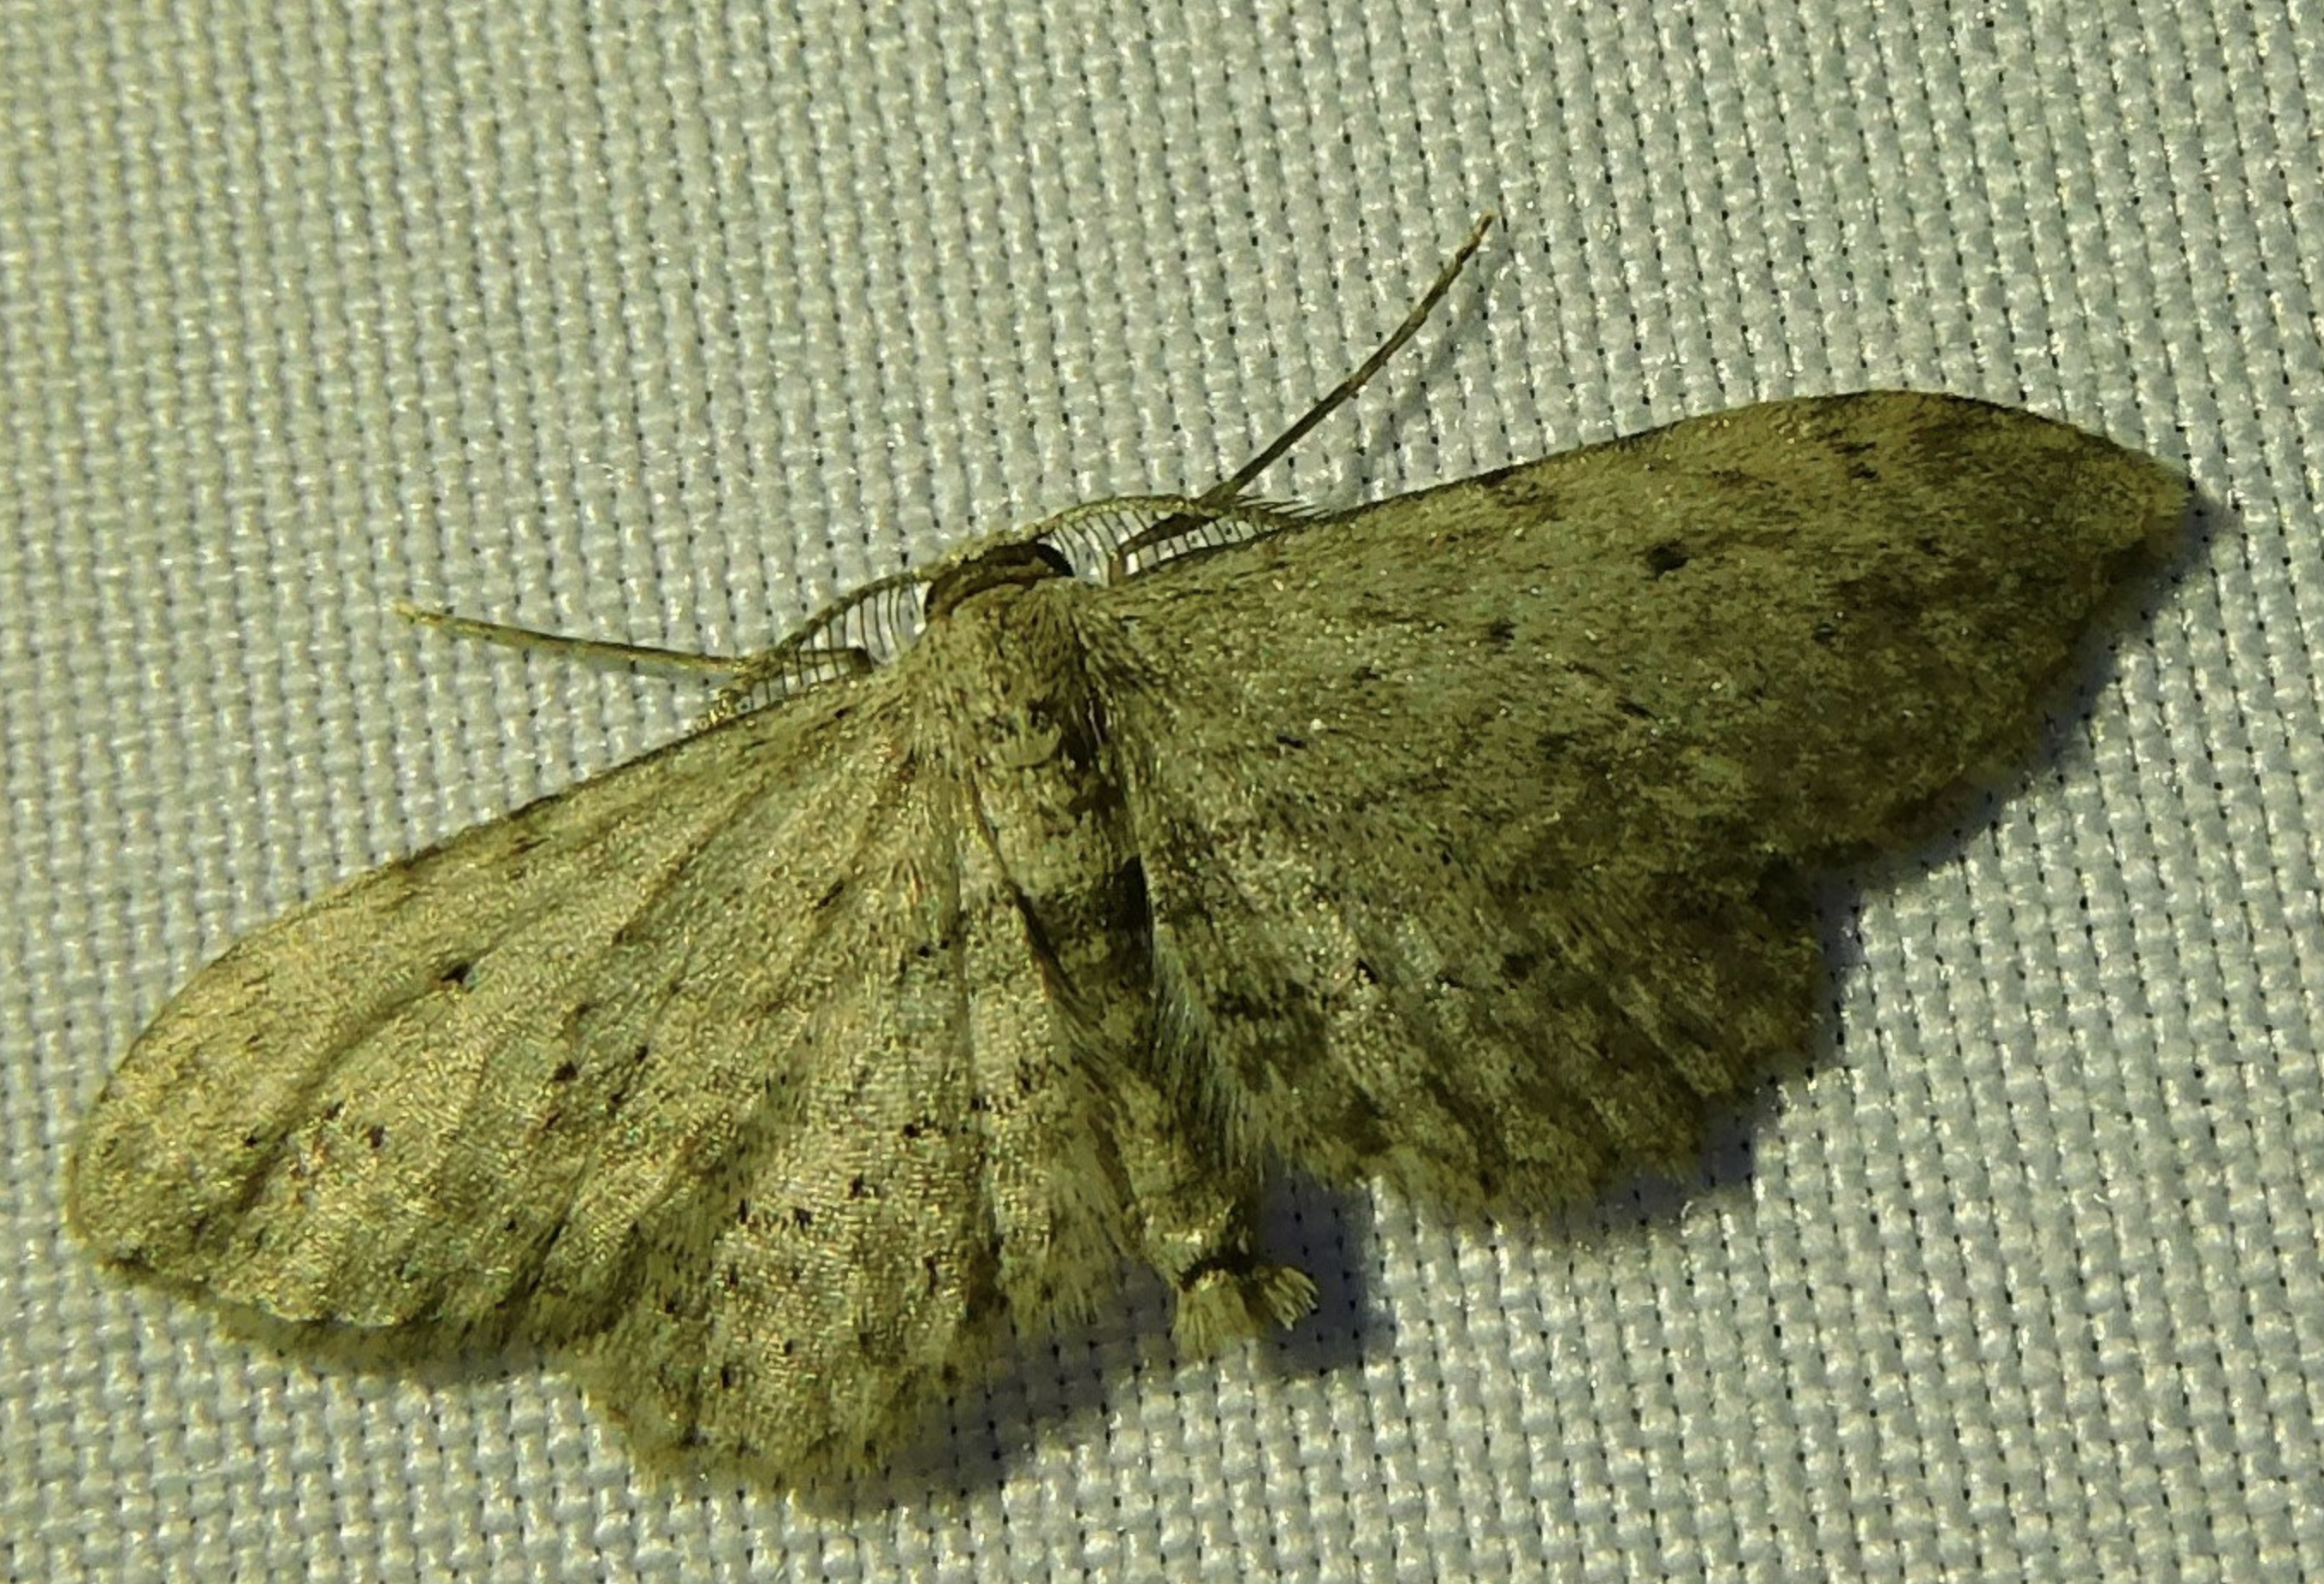 Moth from Mothing Event